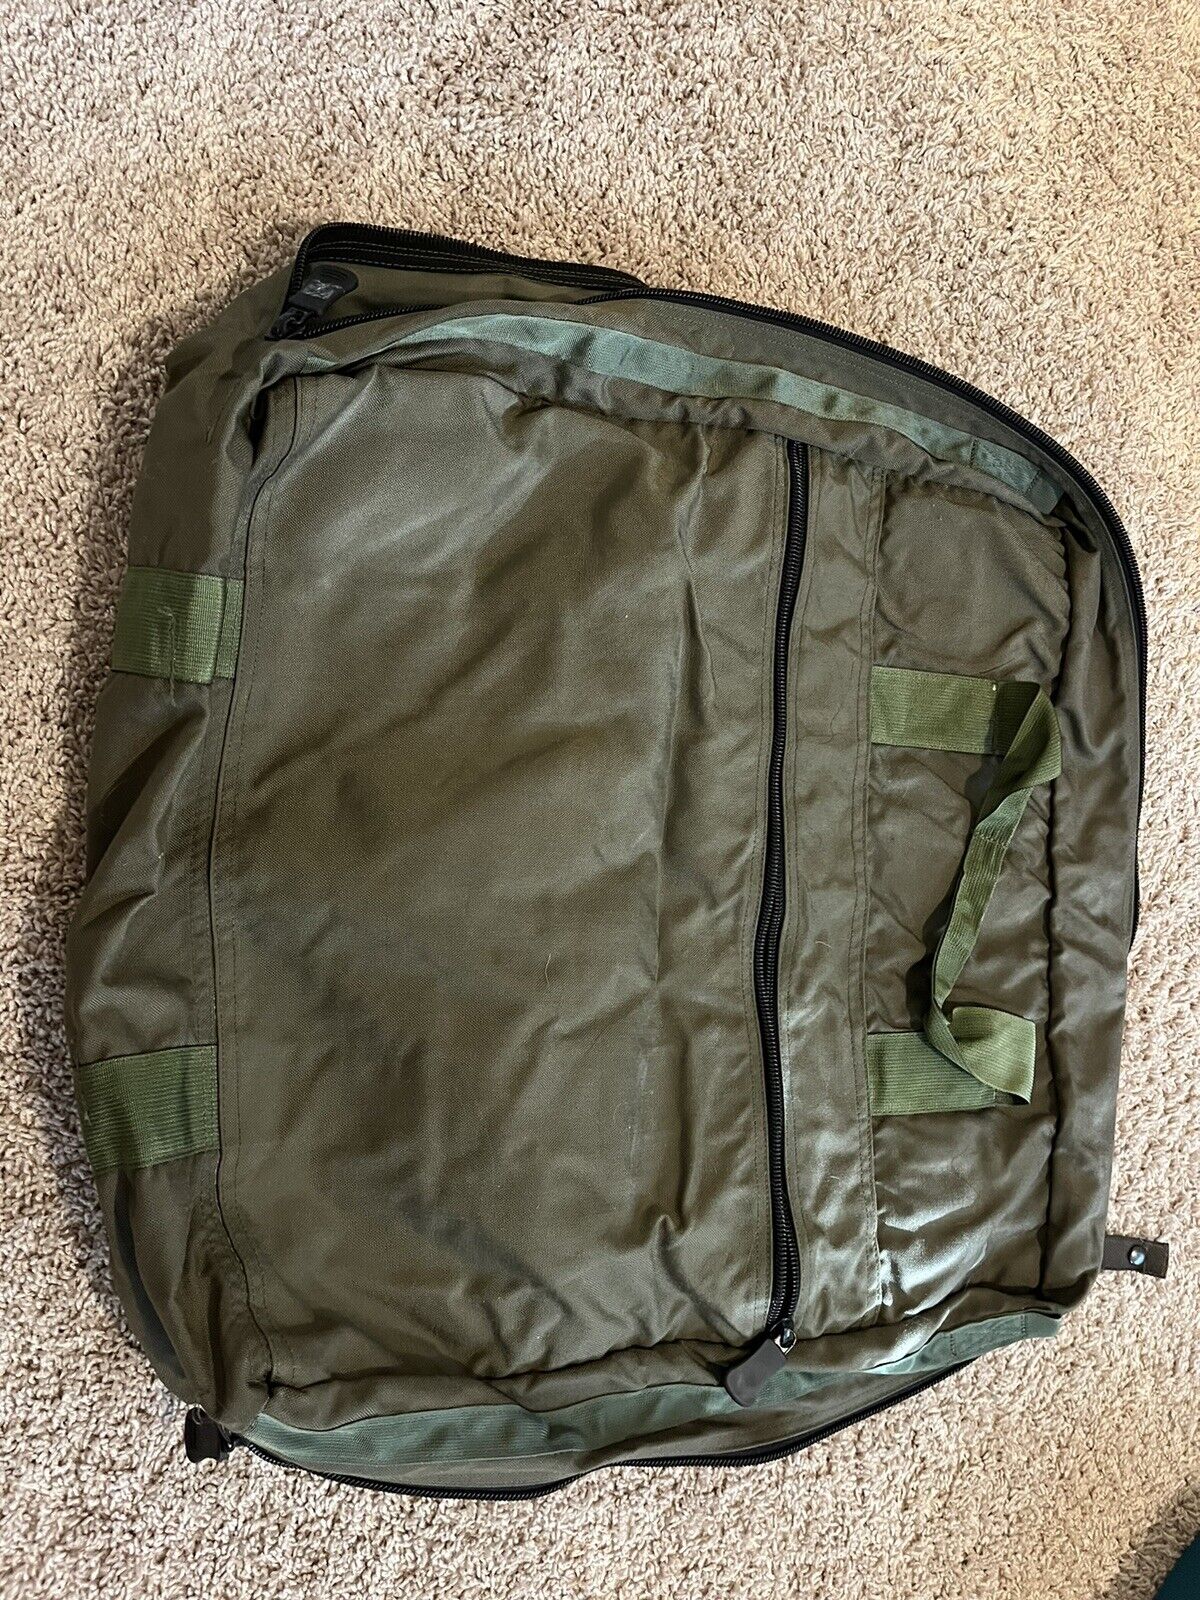 PARACLETE PRE MSA LCS CARRY BAG DEPLOYMENT 27in SOF